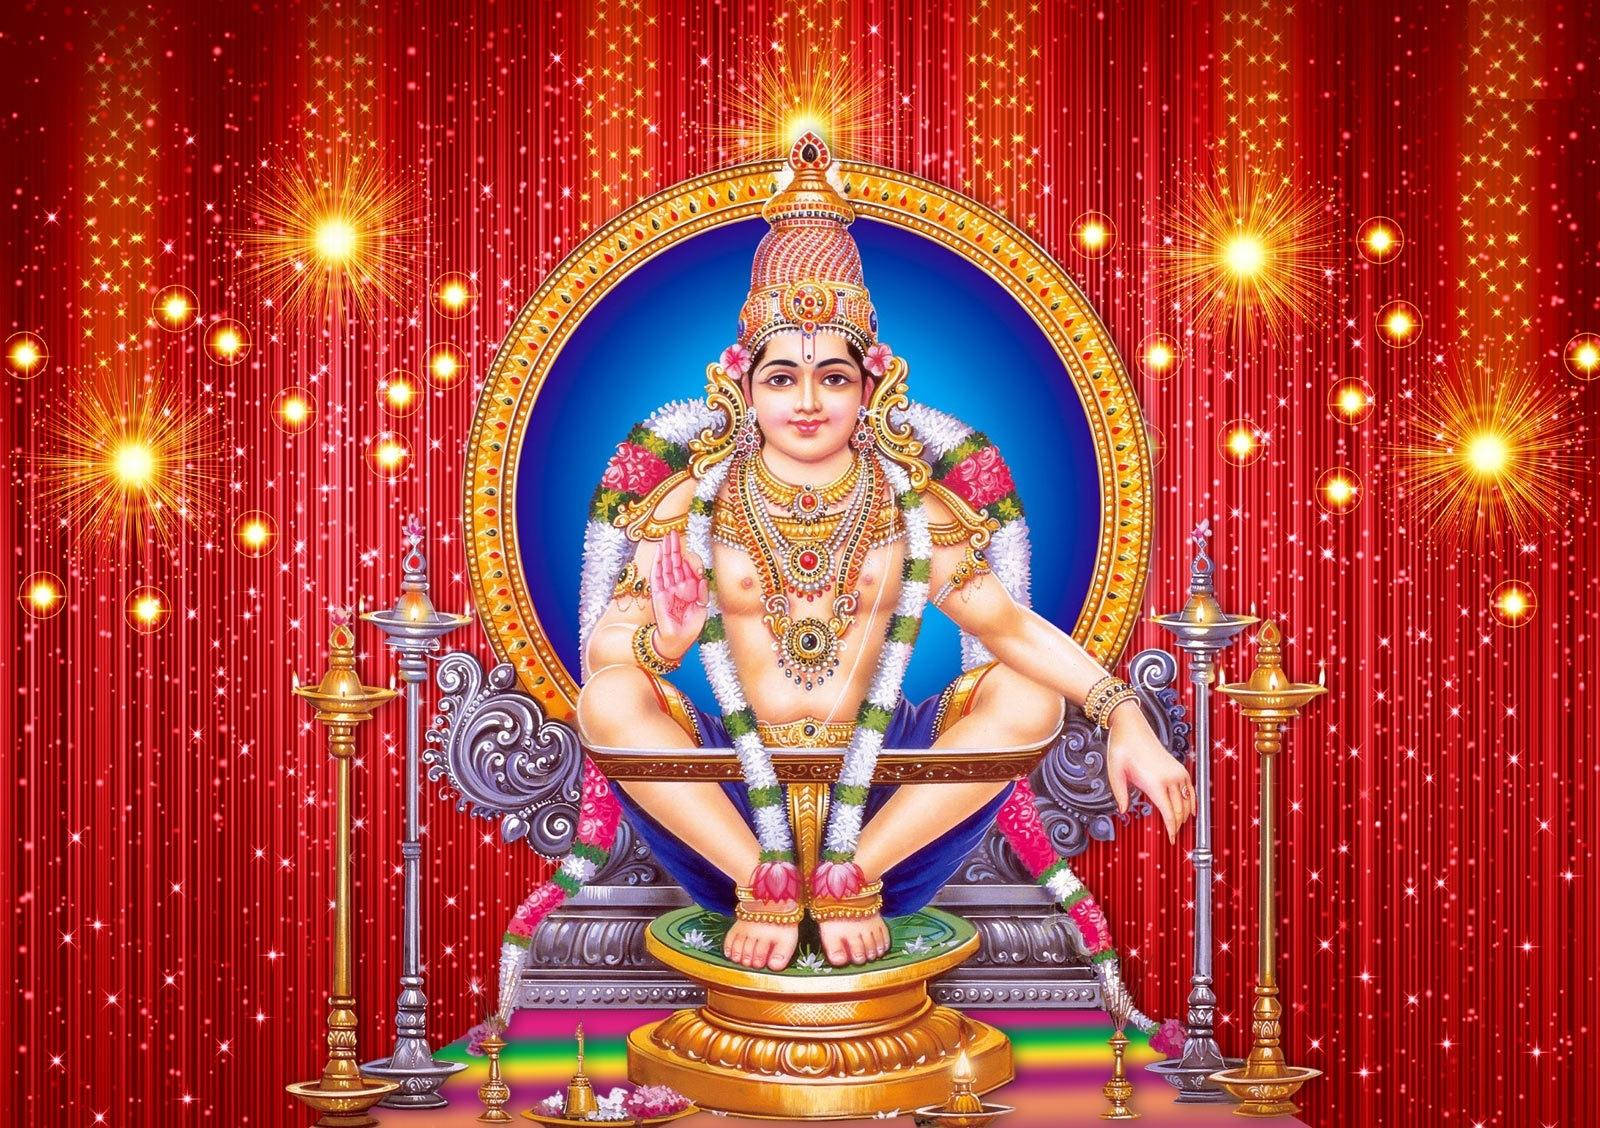 Glowing Visage Of Lord Ayyappa With Vivid Fireworks Background